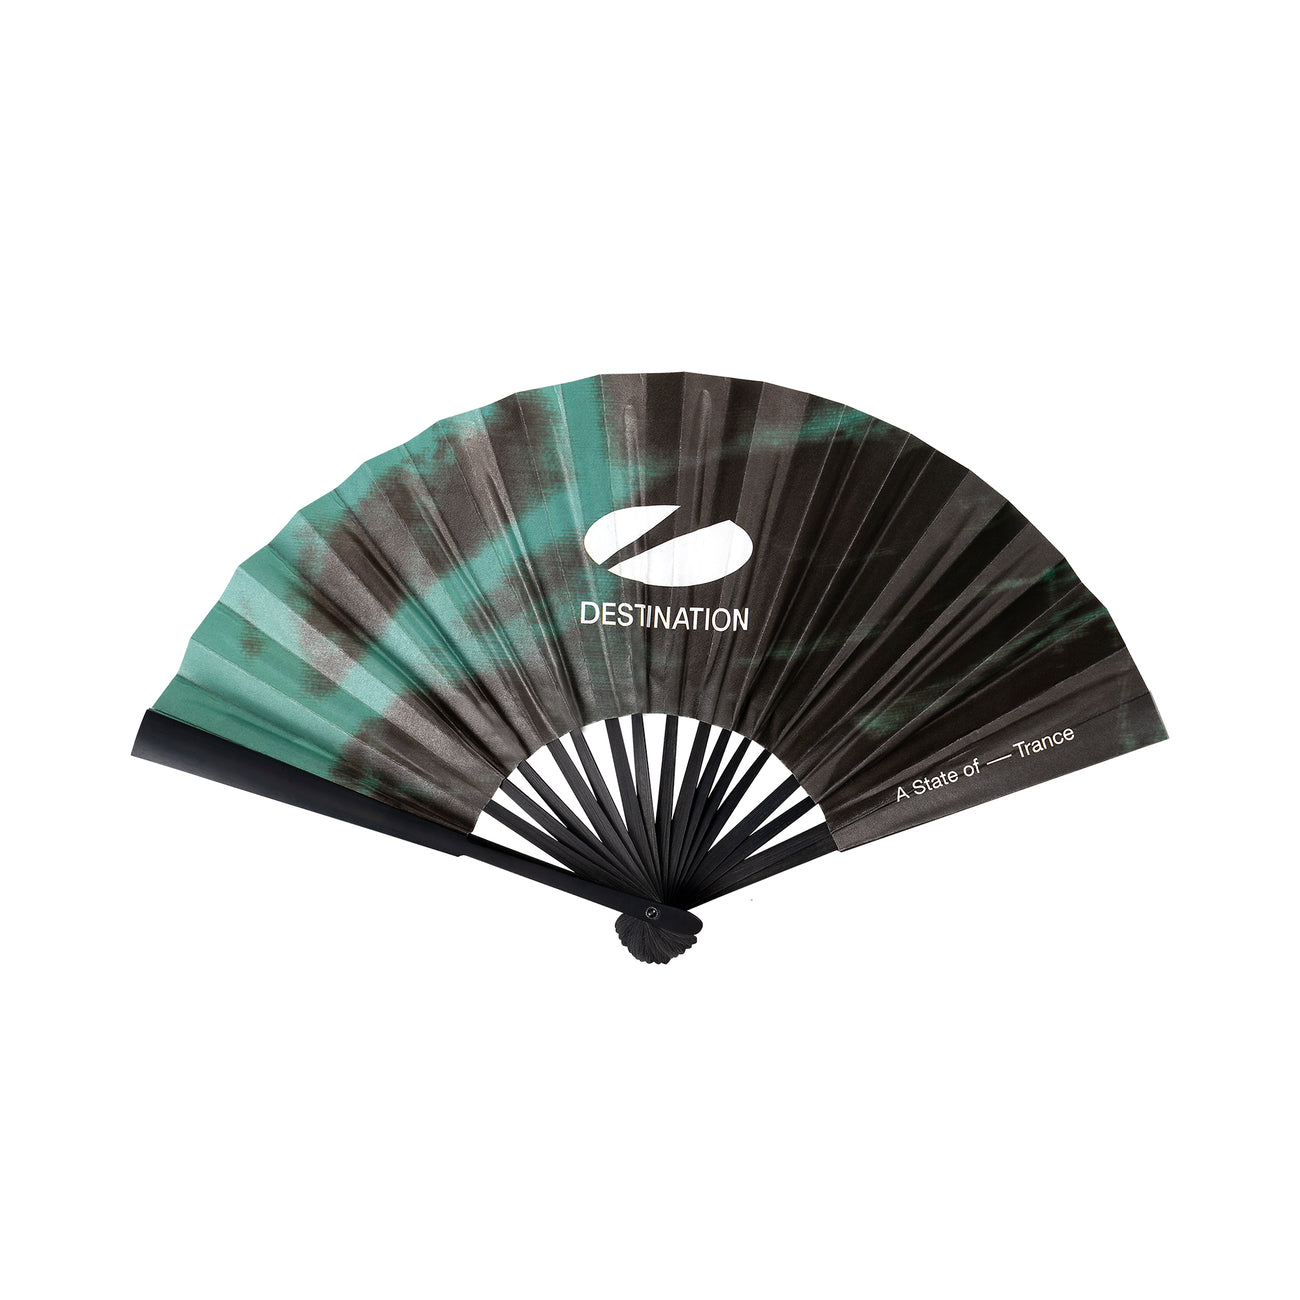 A State of Trance DESTINATION Hand Fan